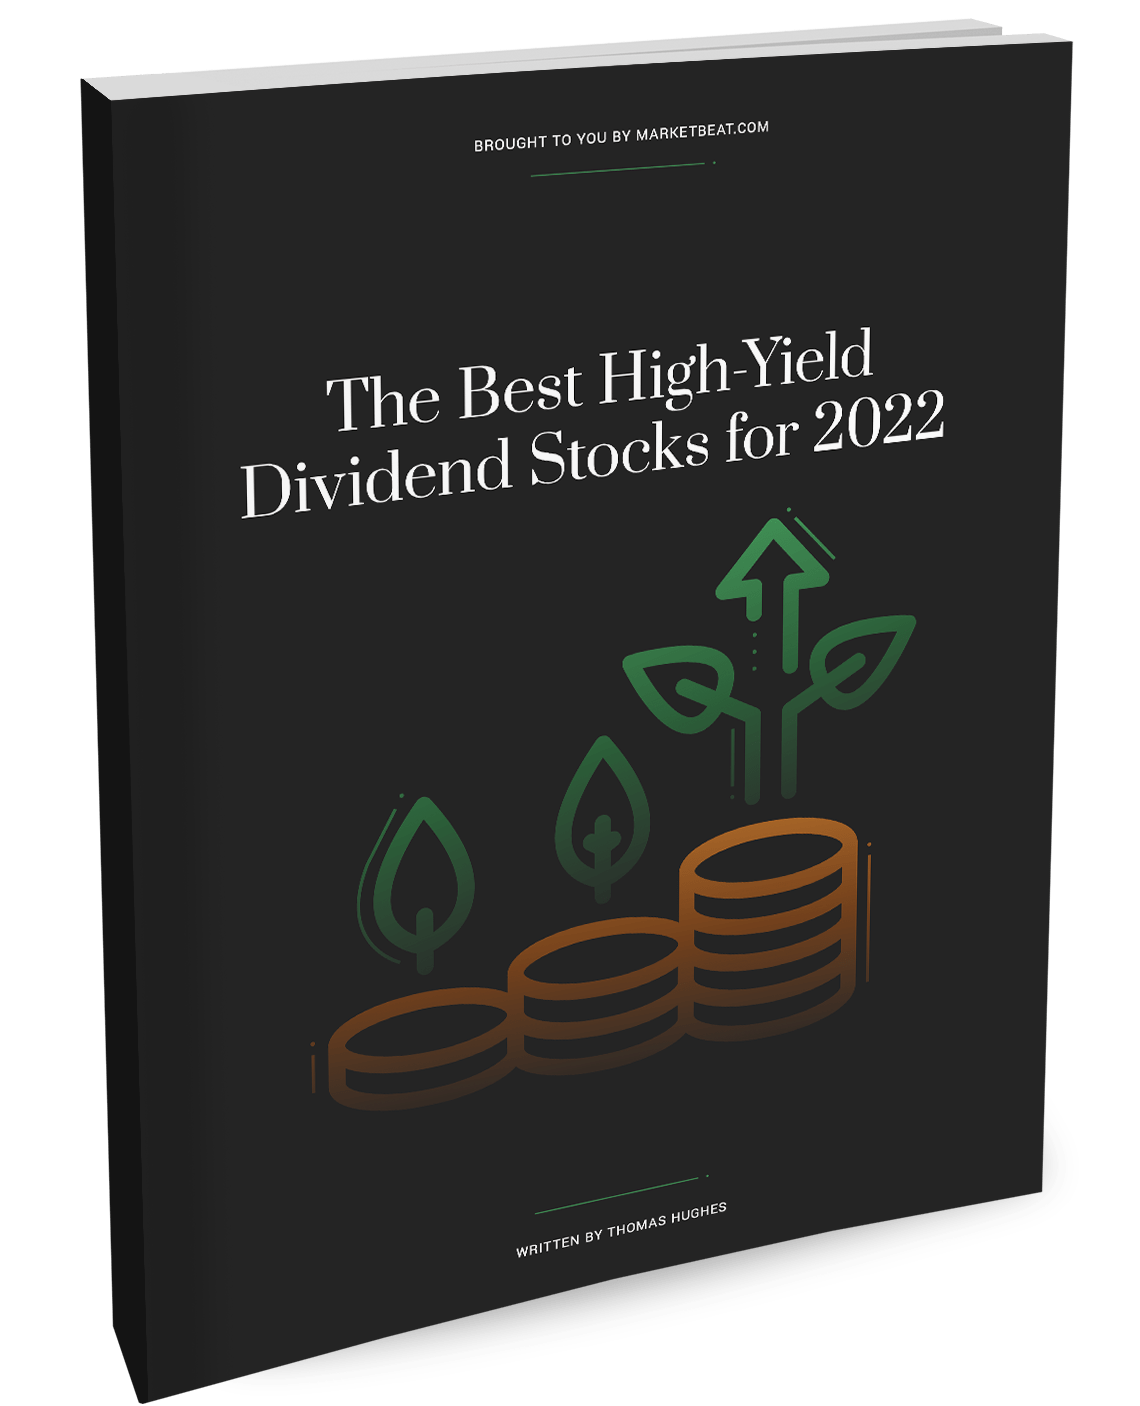 The best high-yielding stocks to cover for 2022